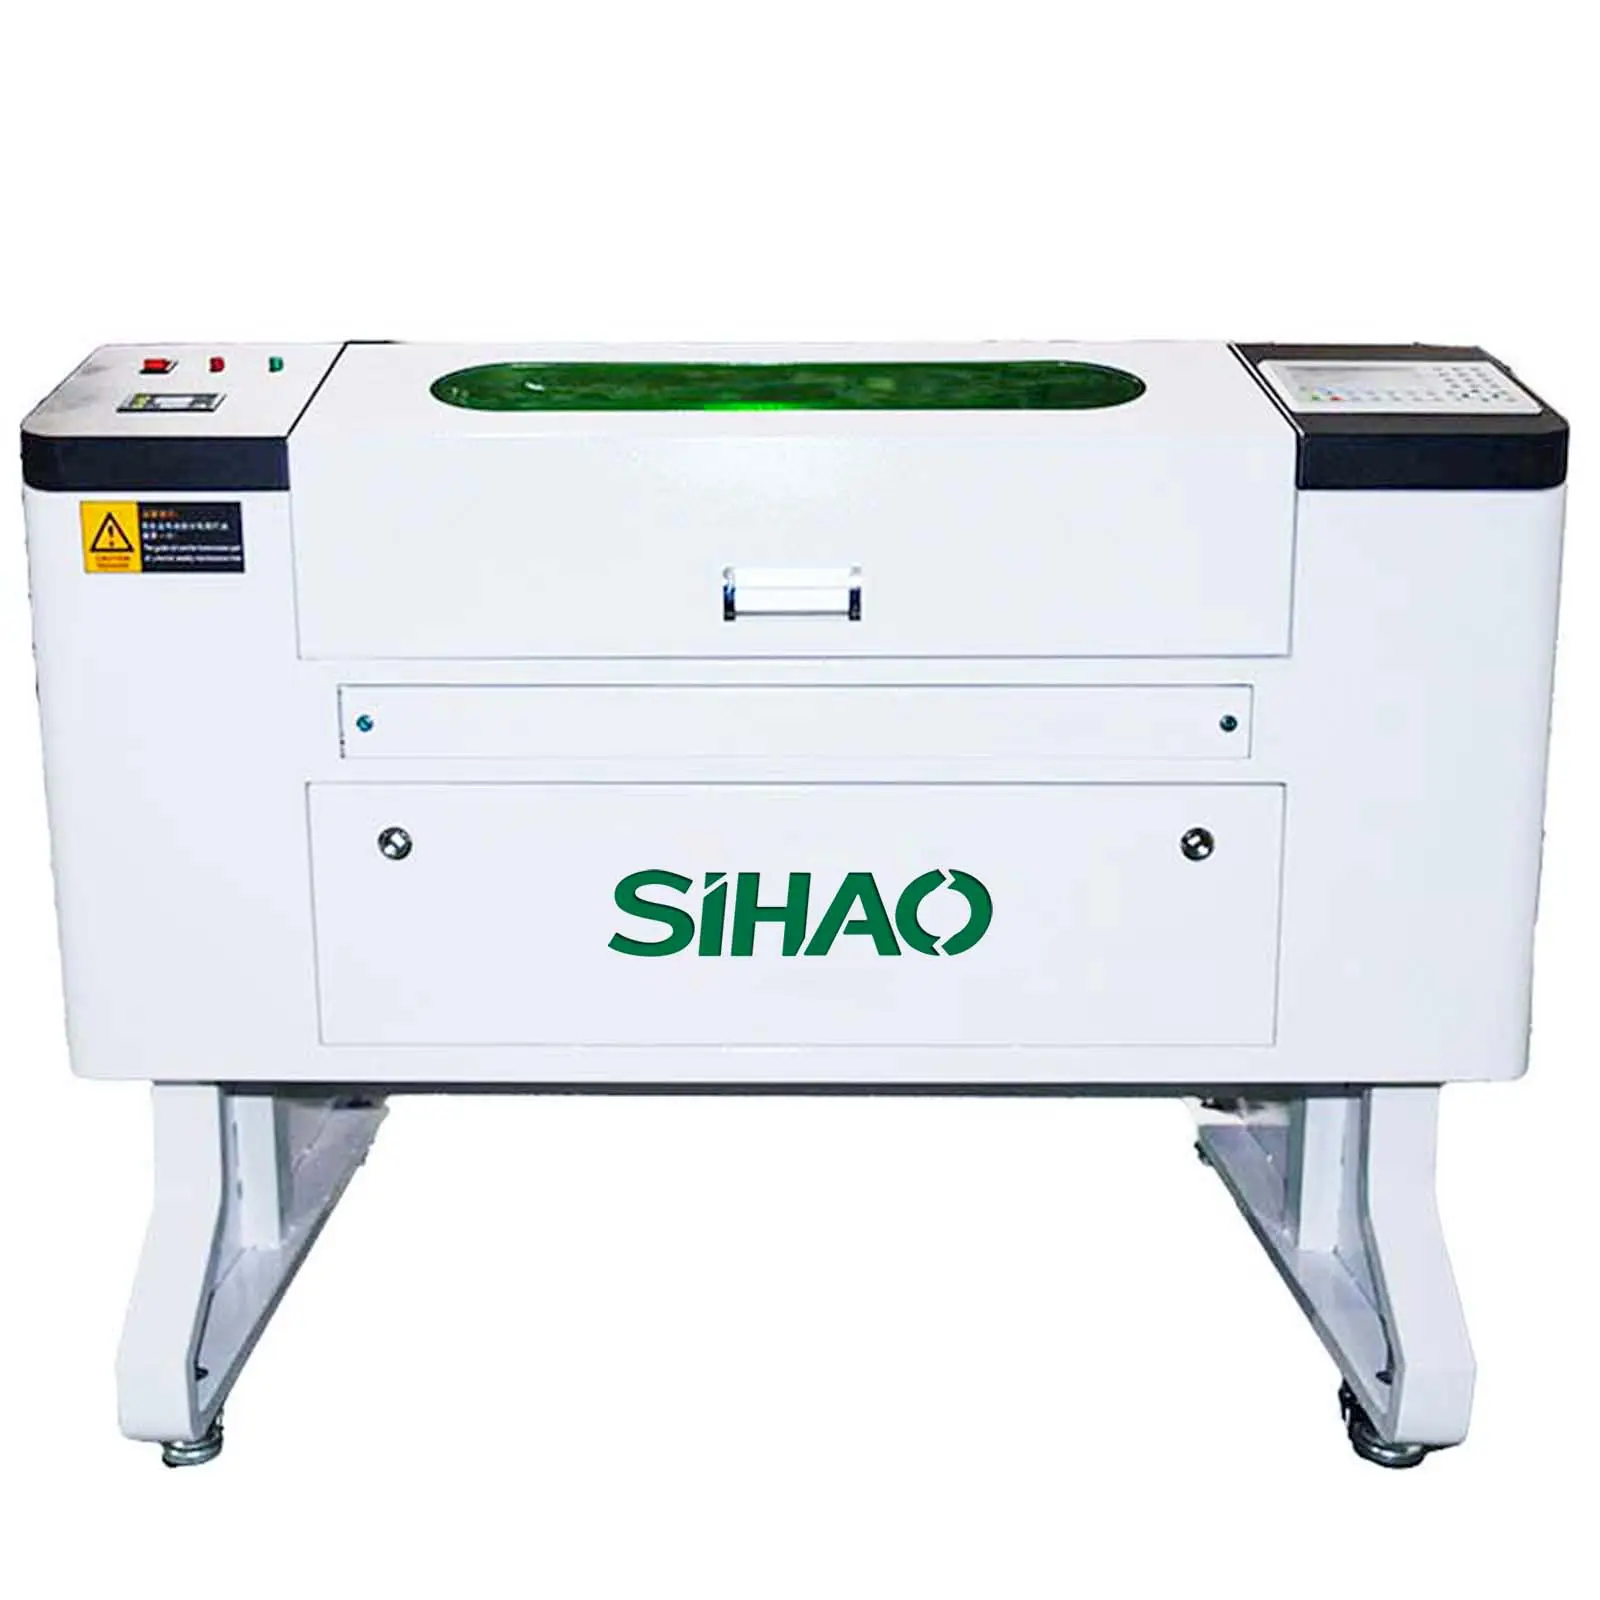 7050 laser engraver 80W rubber stamp engraving machine White all-in-one engraving machine